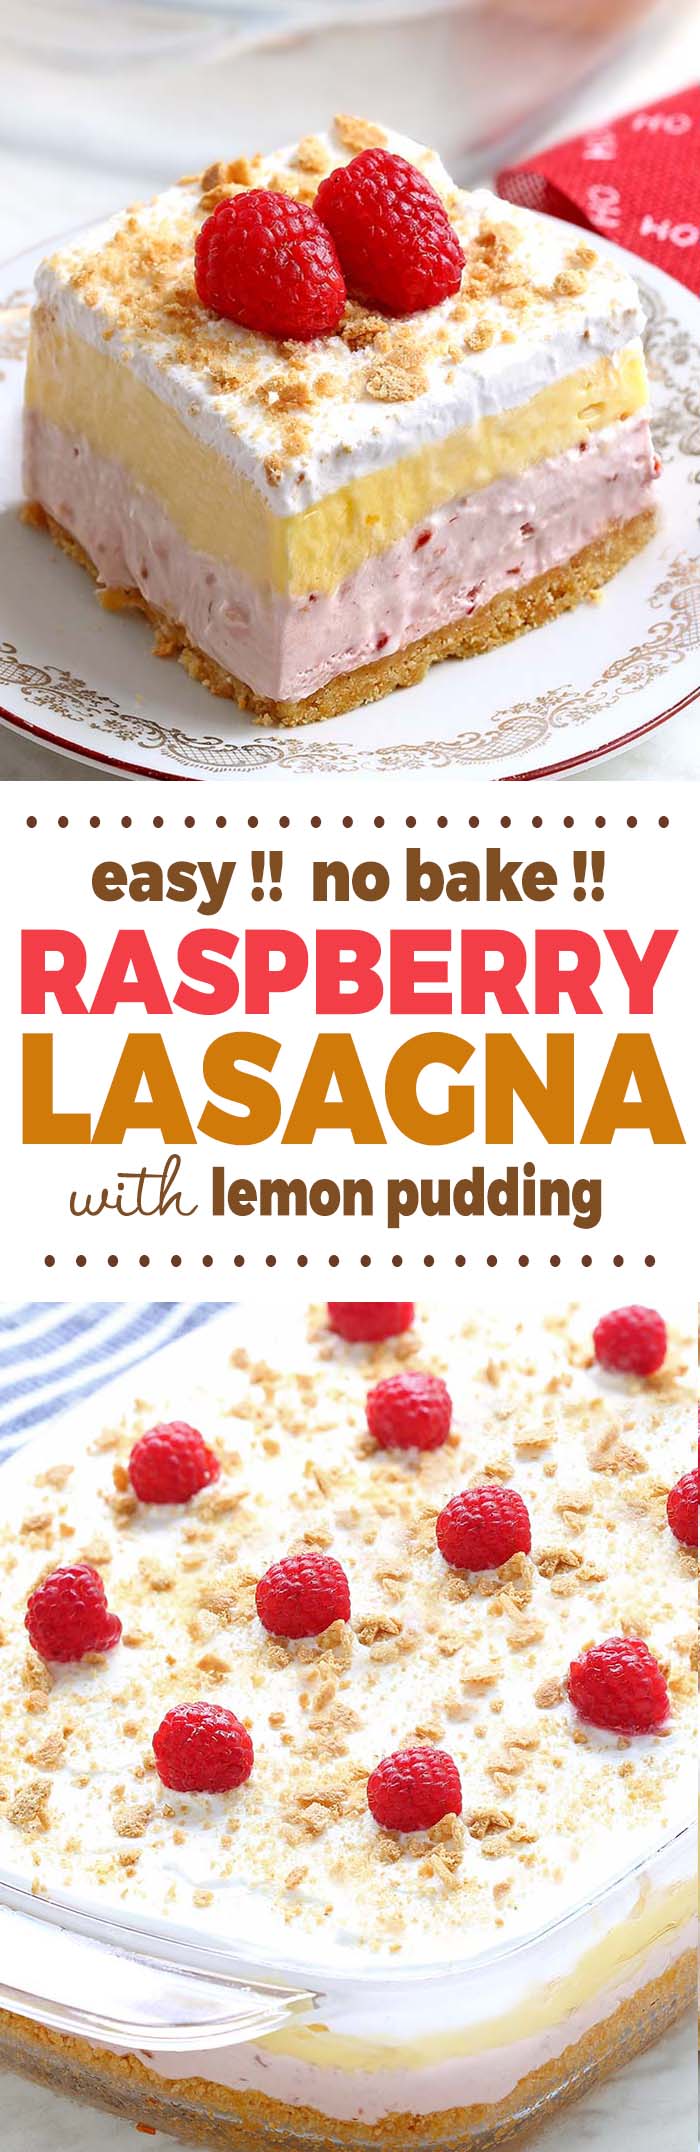  “Creaminess”, “coolness”, “tartness”, “sweetness” — these are powerful words to describe the taste of No Bake Raspberry Cheesecake Lasagna.